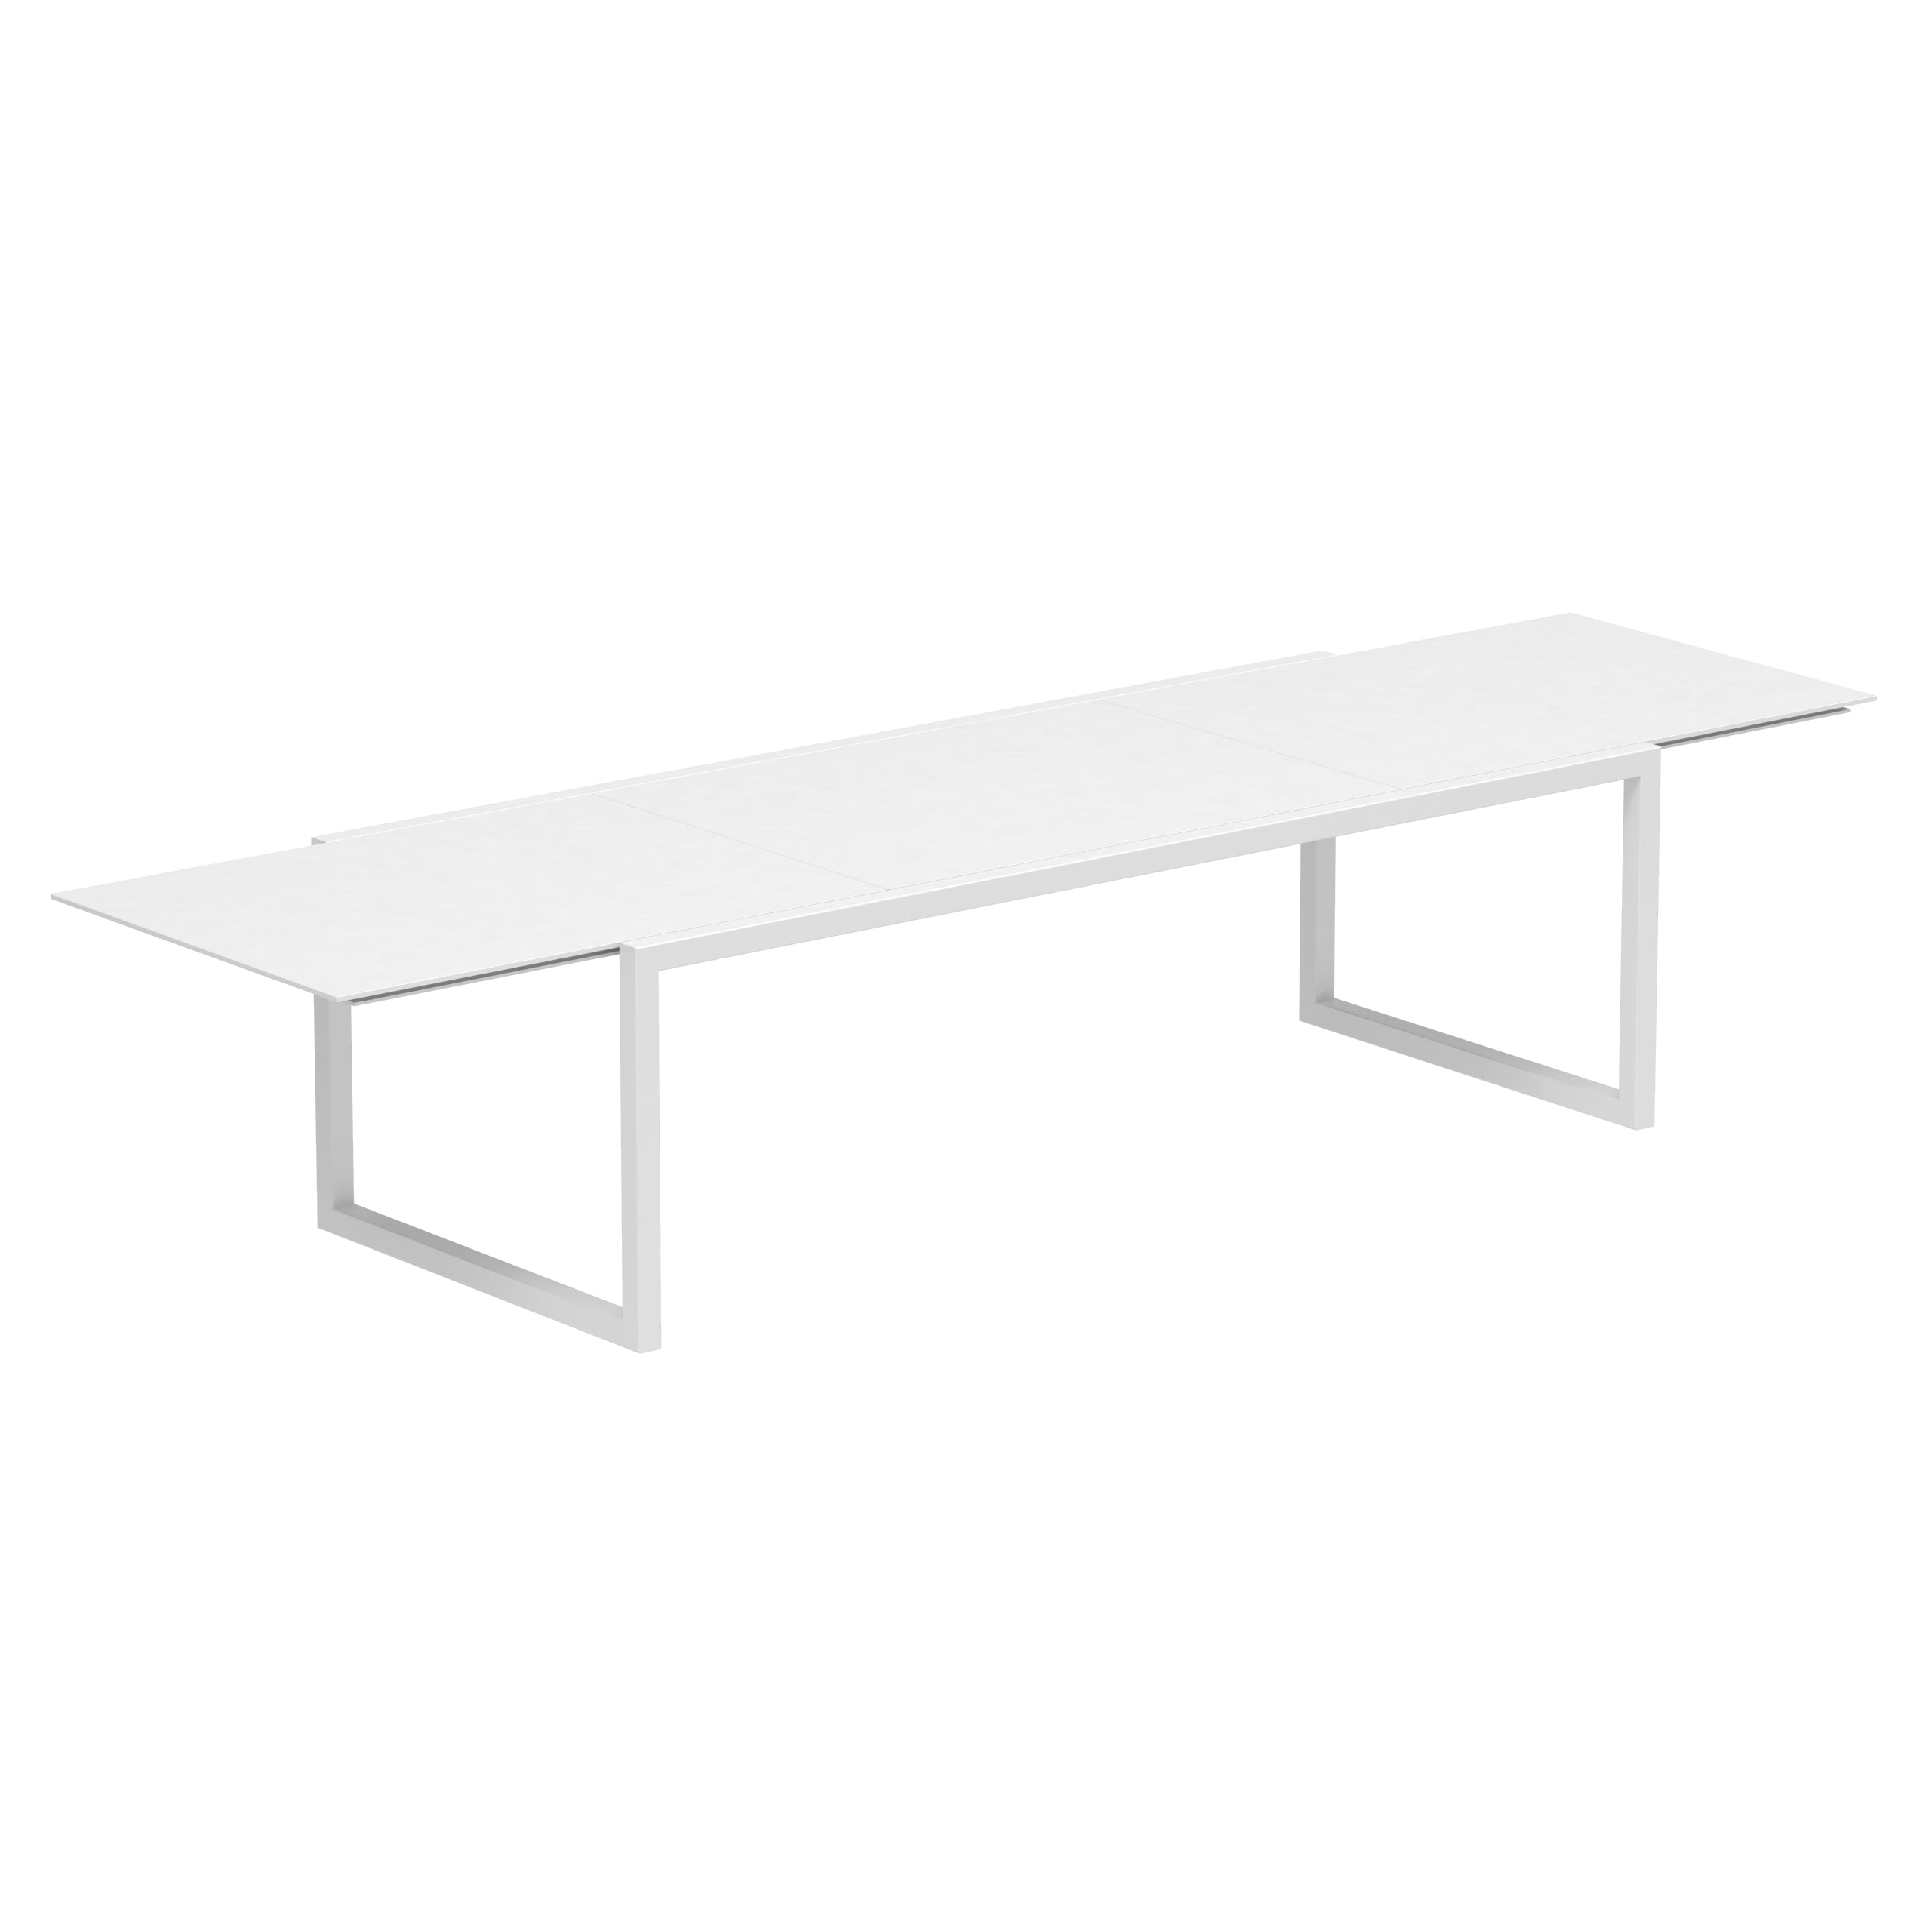 Ninix Powder-coated Extending Dining Tables